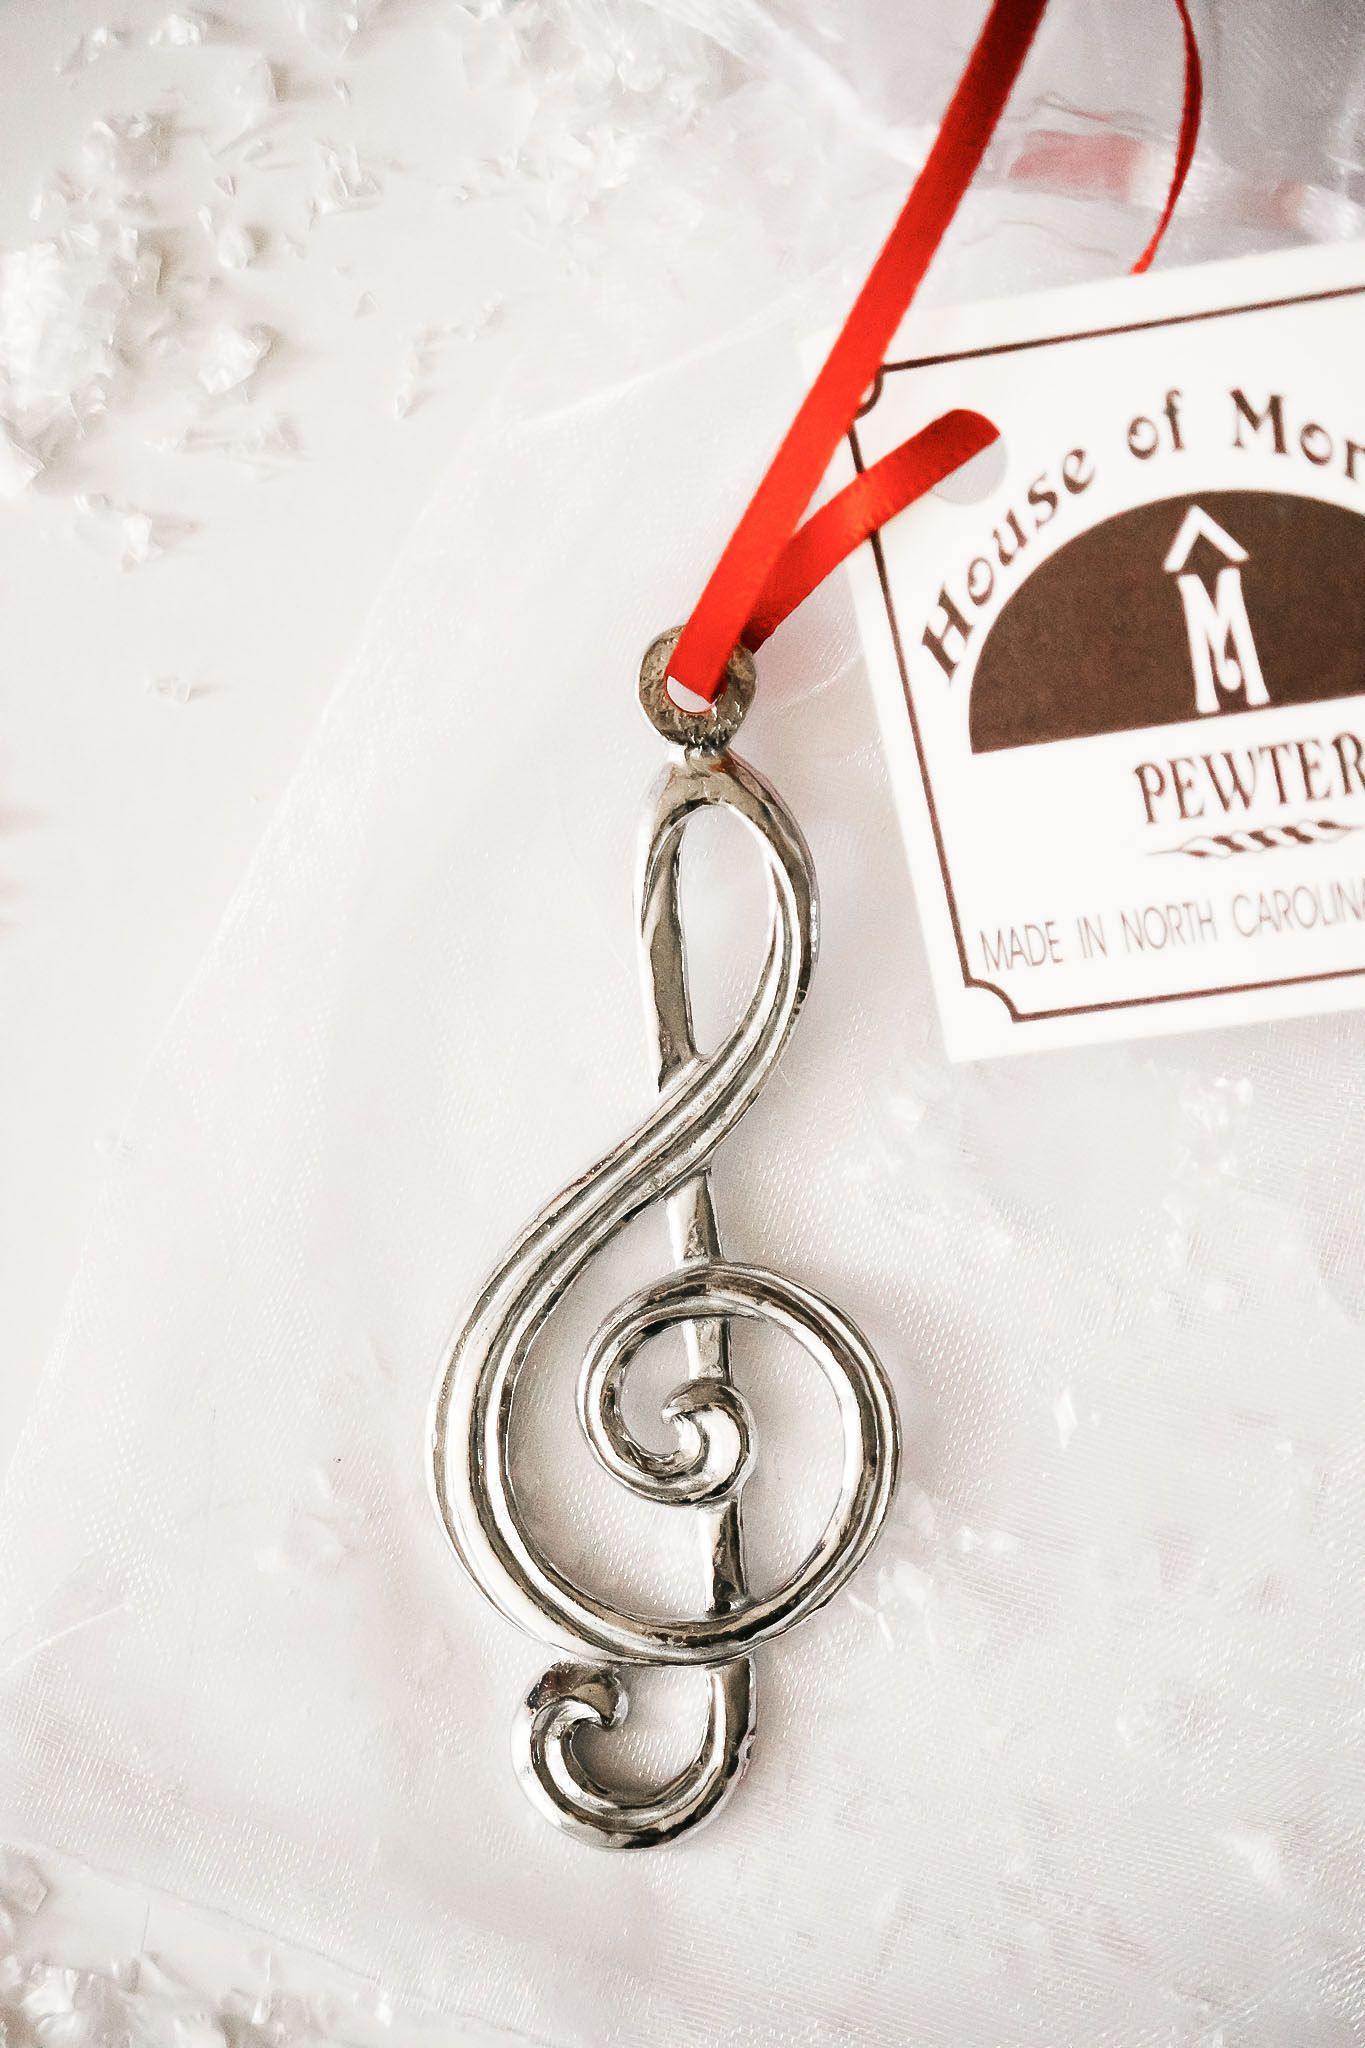 Handmade Pewter Music Instrument Music Note Christmas Ornament Gift - House of Morgan Pewter